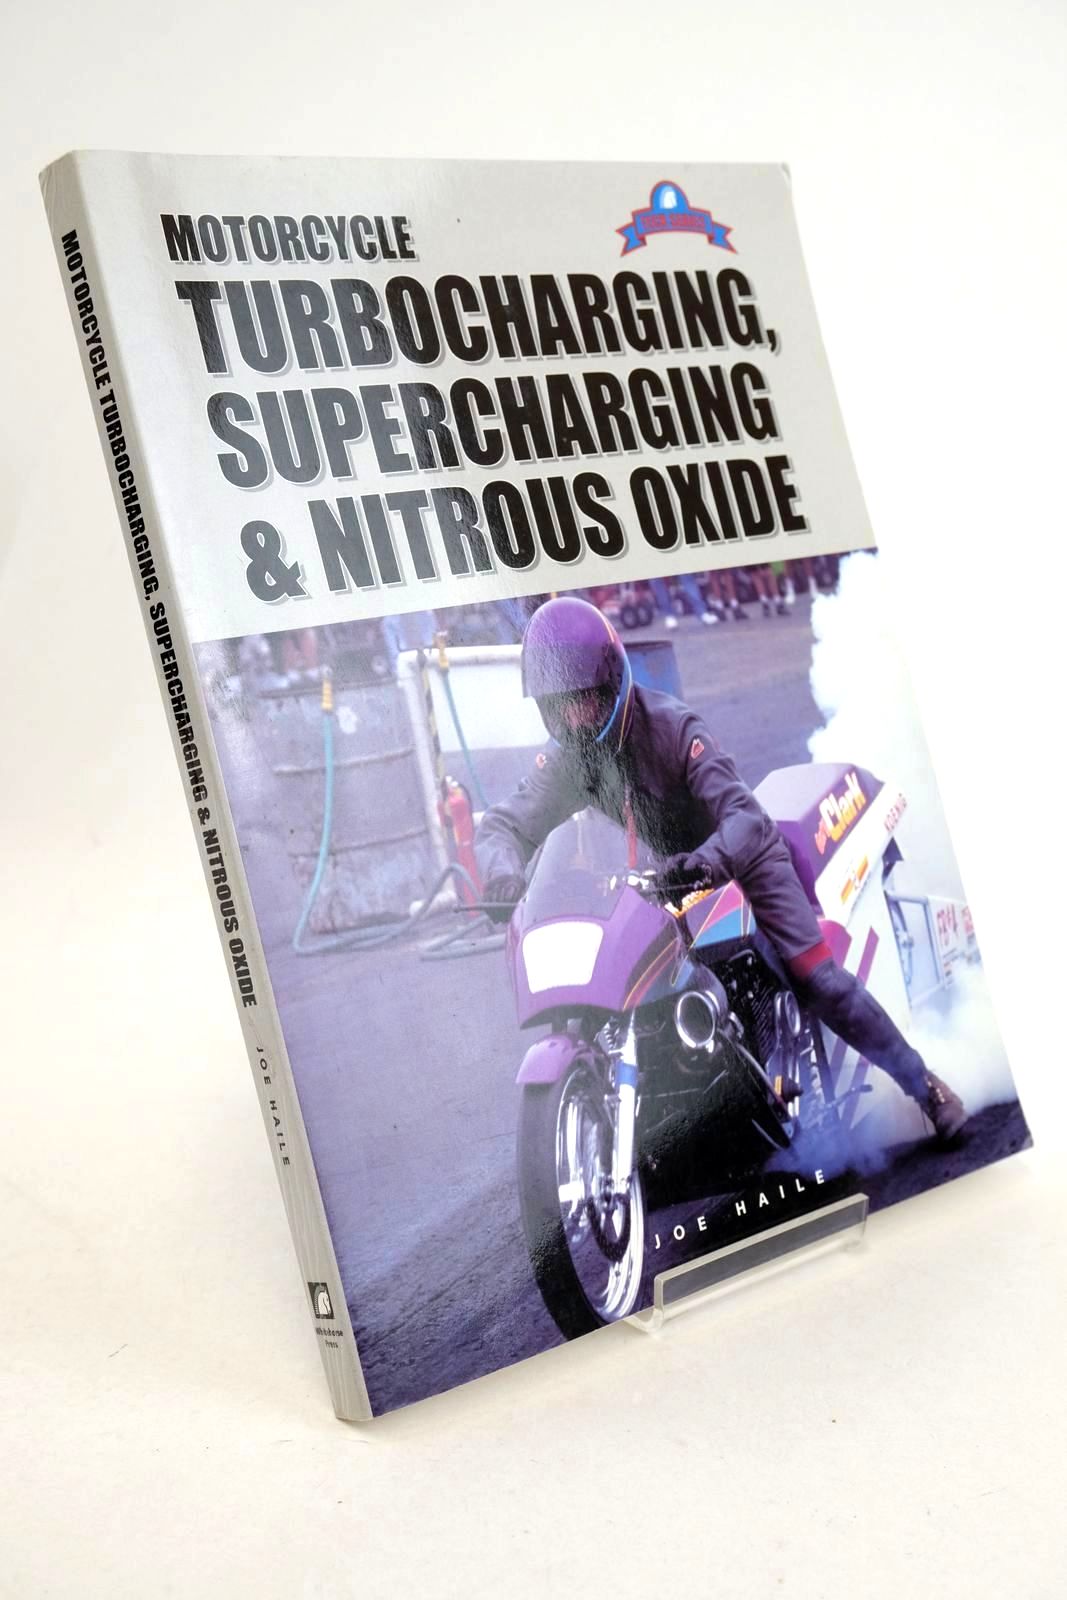 Photo of MOTORCYCLE TURBOCHARGING SUPERCHARGING &amp; NITOUS OXIDE written by Haile, Joe published by Whitehorse Press (STOCK CODE: 1327276)  for sale by Stella & Rose's Books